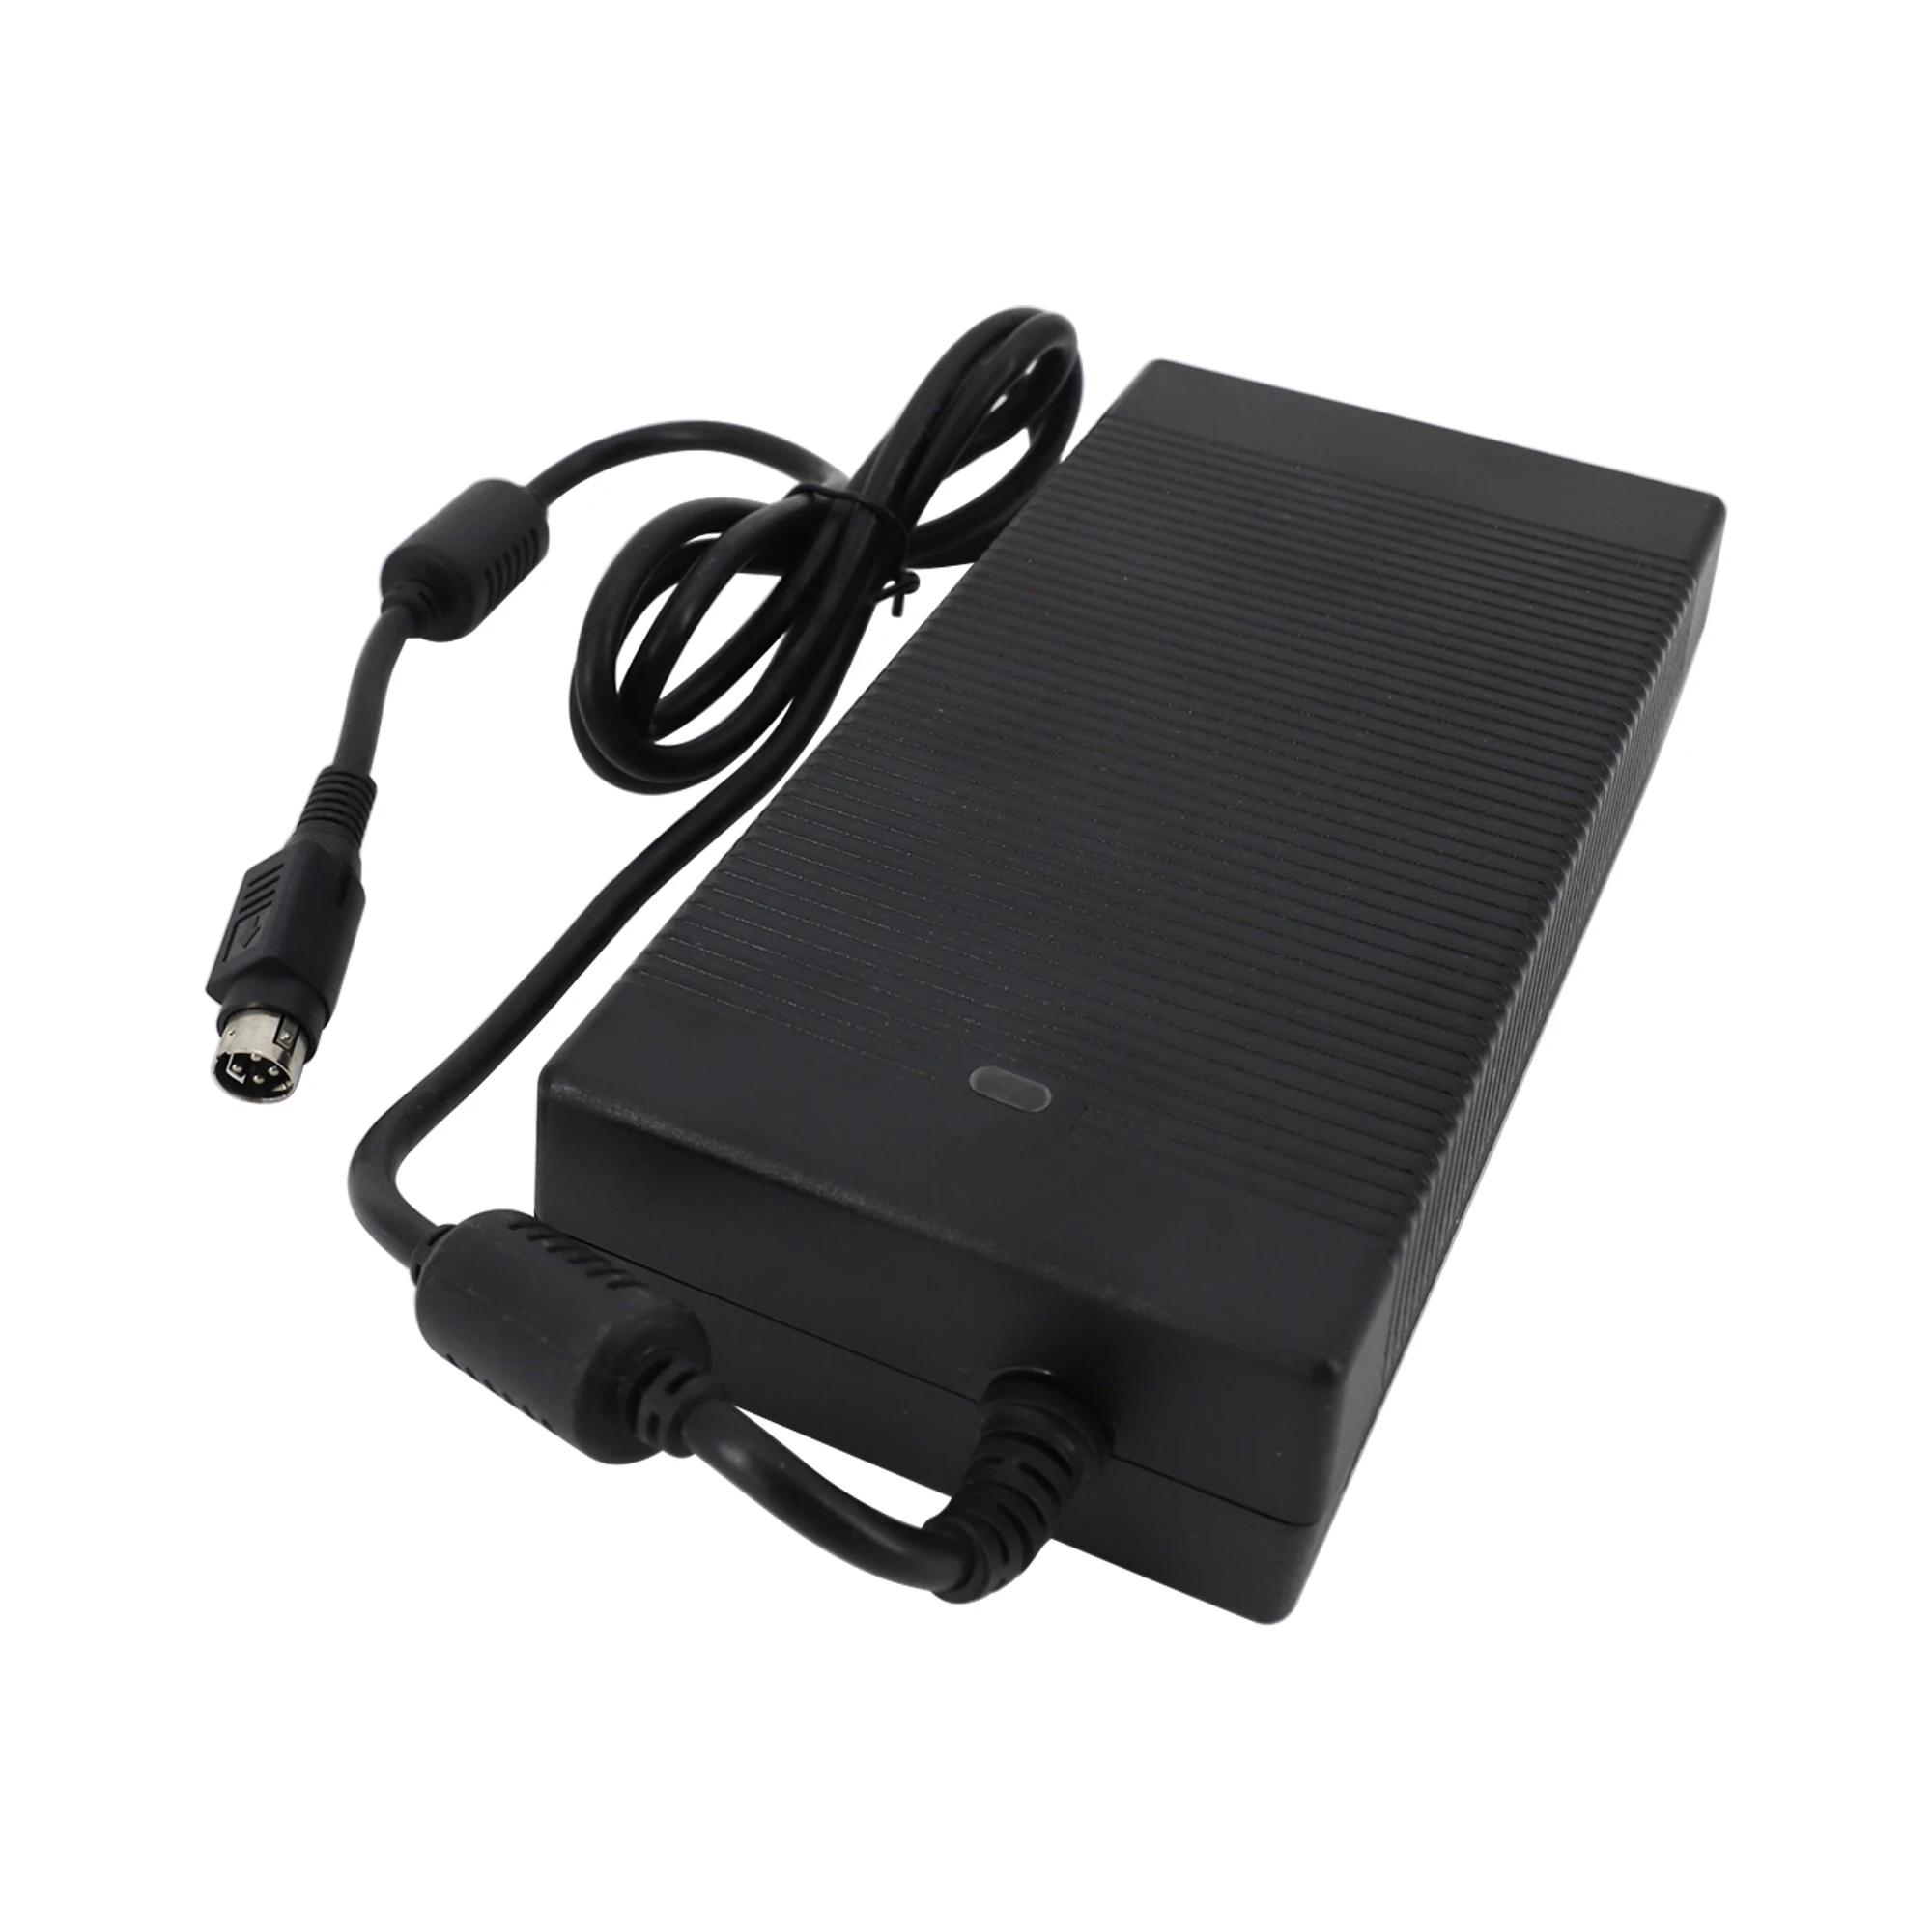 12v 12.5a 150w FSP Ac Power Supply Charger  For QNAP TS-412 NAS TS-410 DPS-150NB-1B FSP150-AHAN1 Laptop adapter